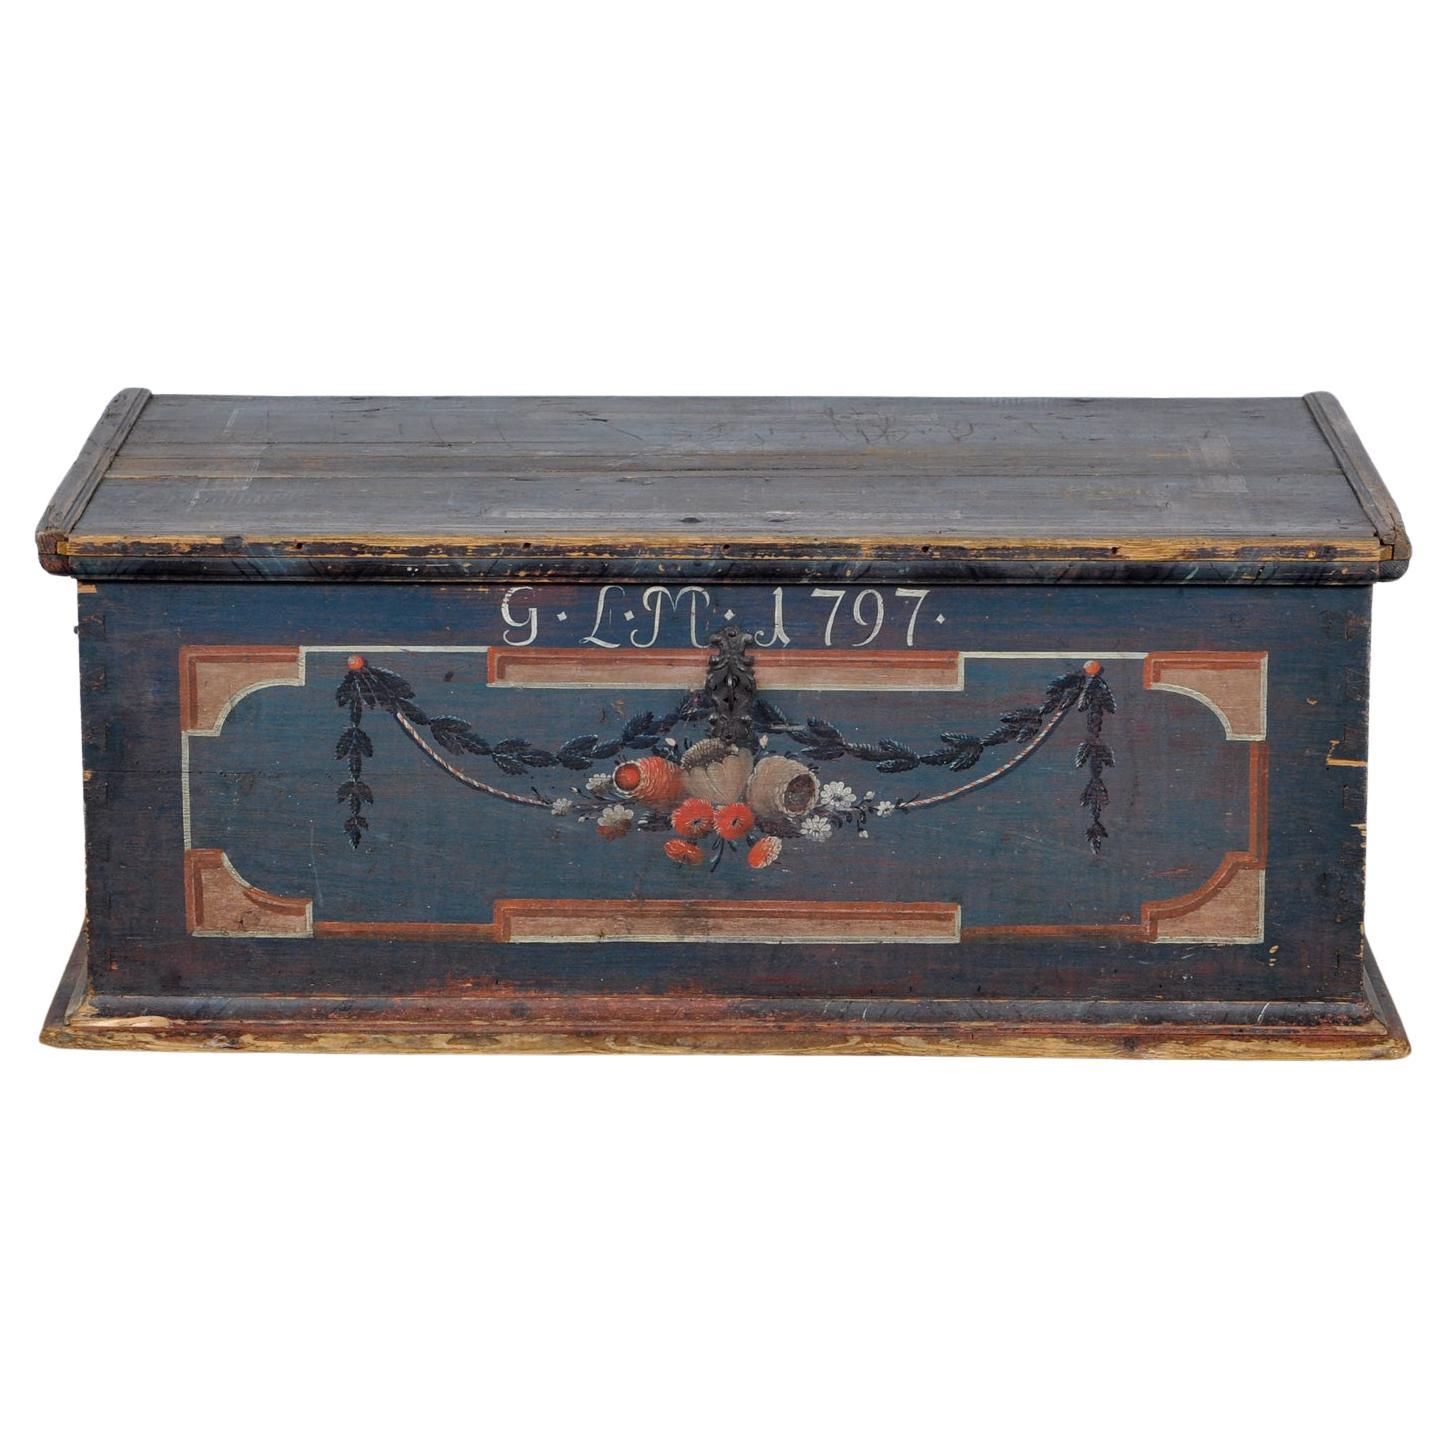 Wedding Chest From 1797